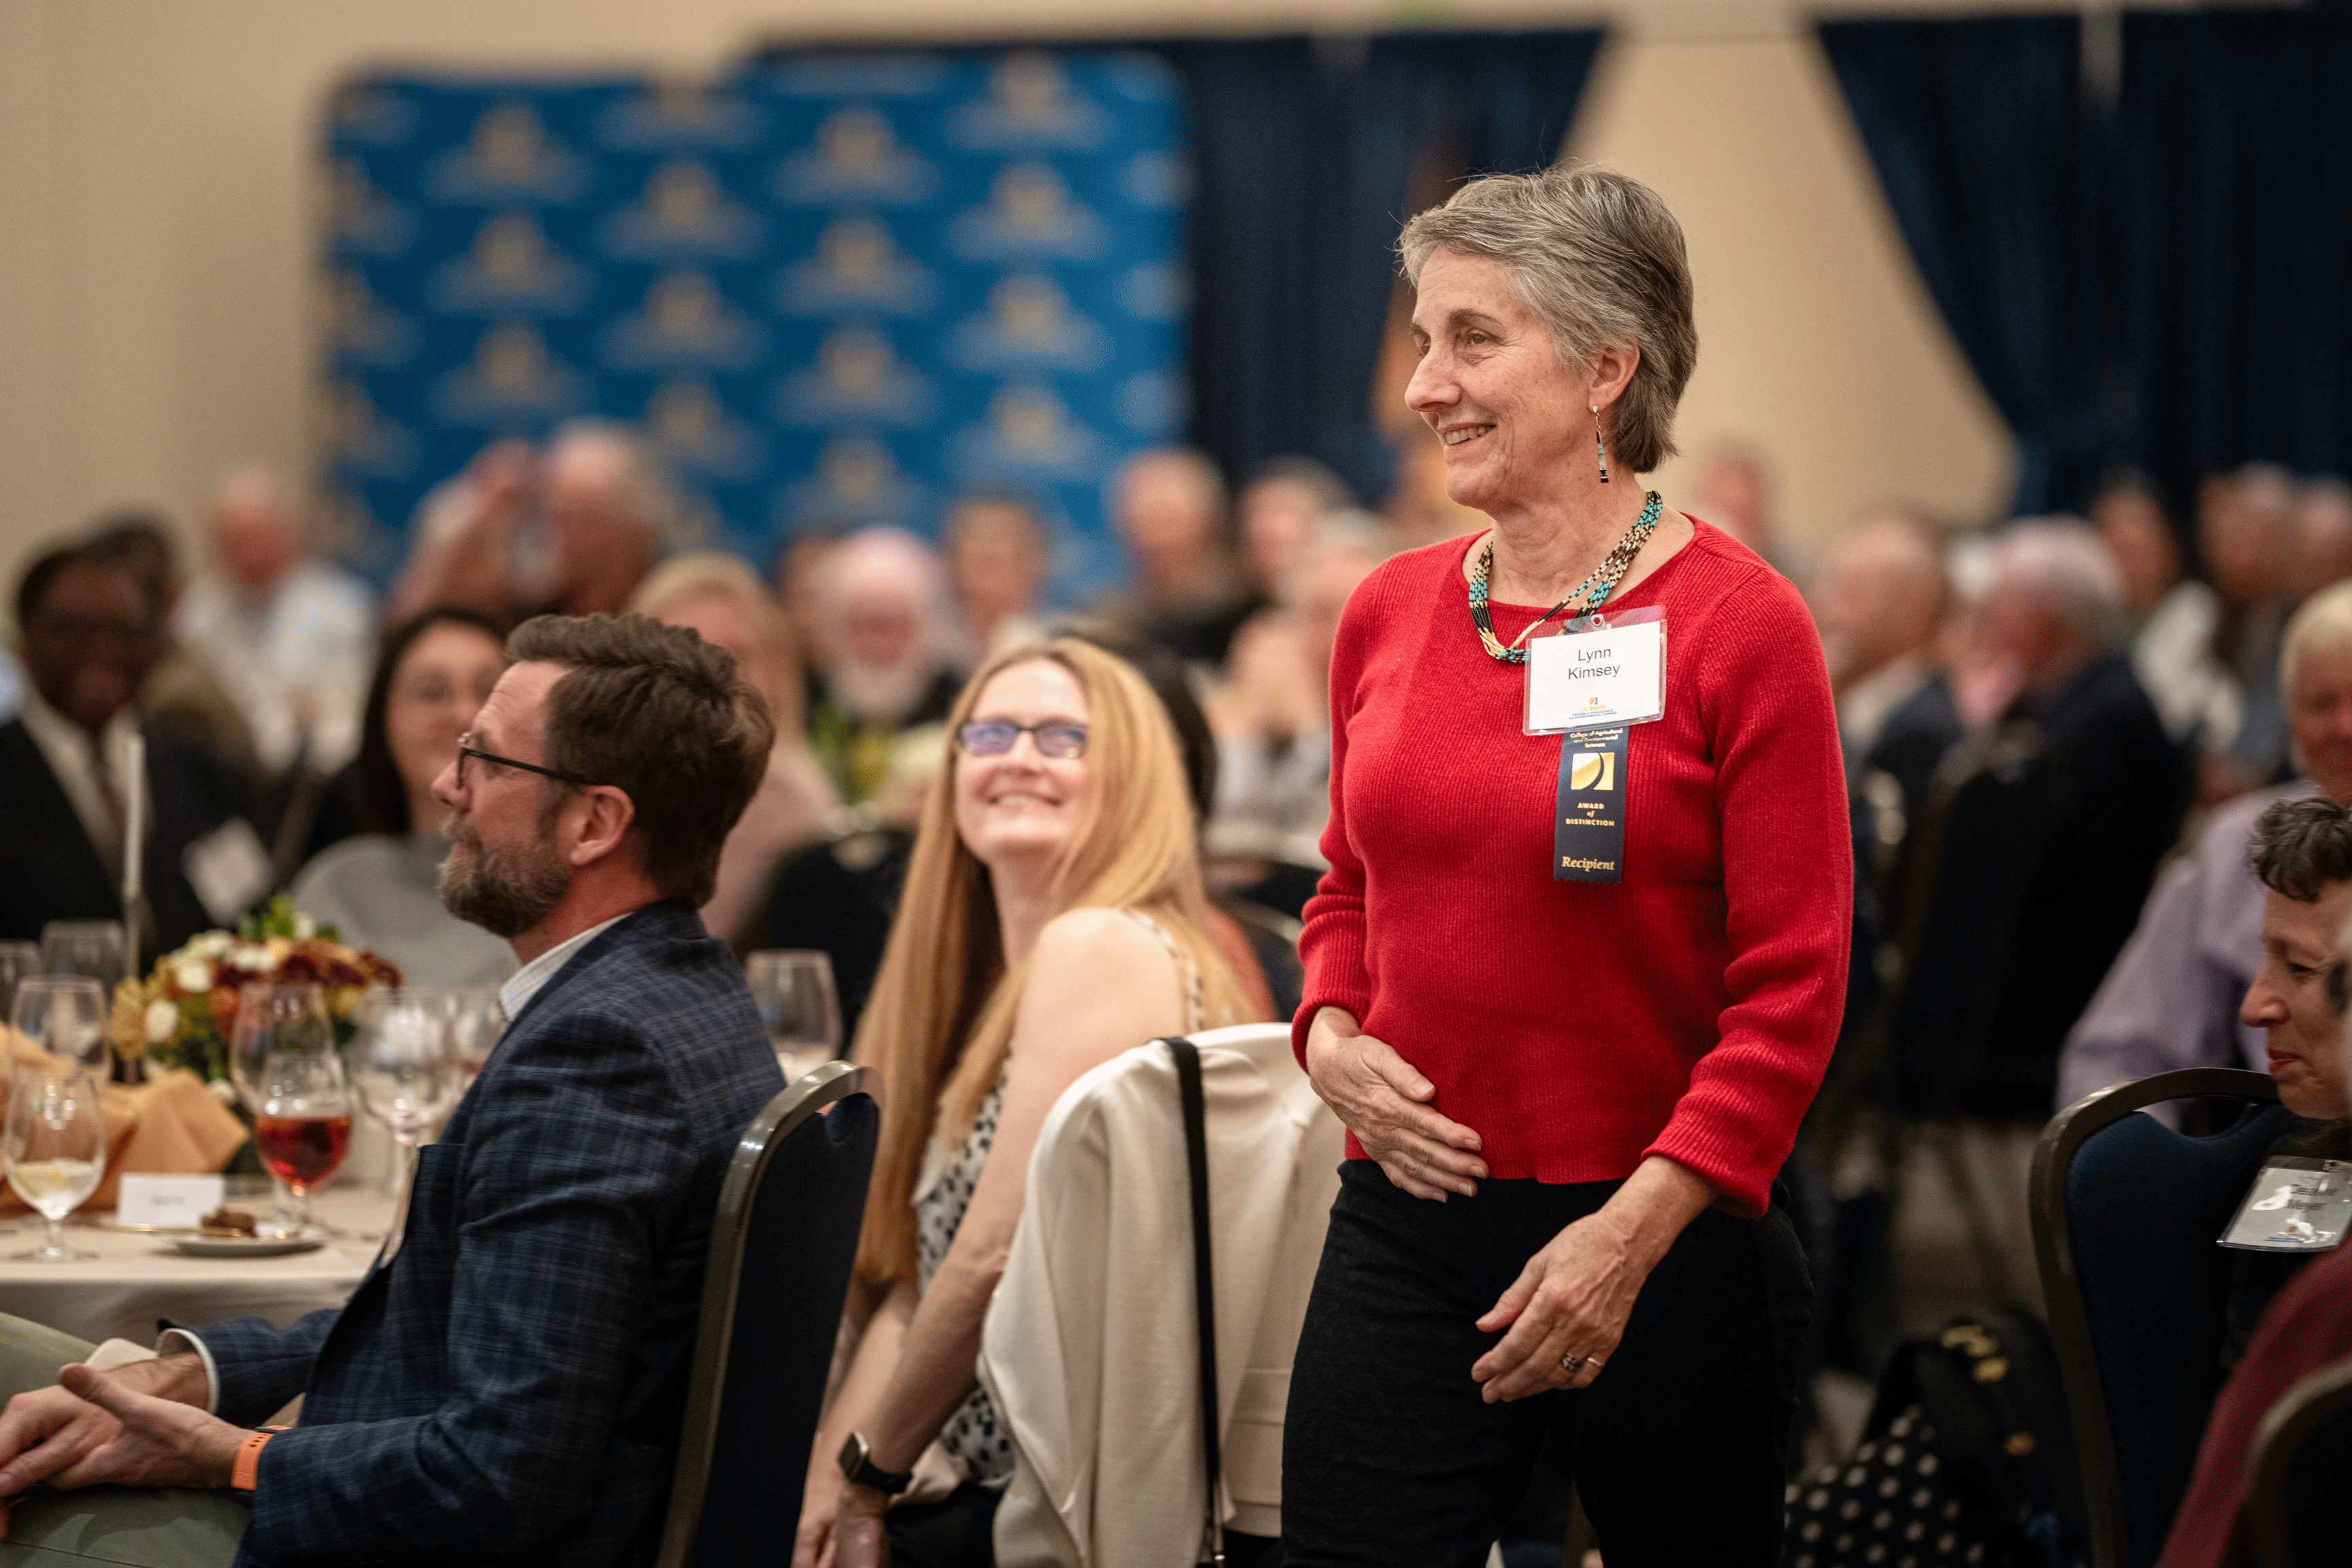 Lynn Kimsey, who was honored as exceptional faculty at the CA&ES Award of Distinction ceremony last year, photo by: Jael Mackendorf, UC Davis